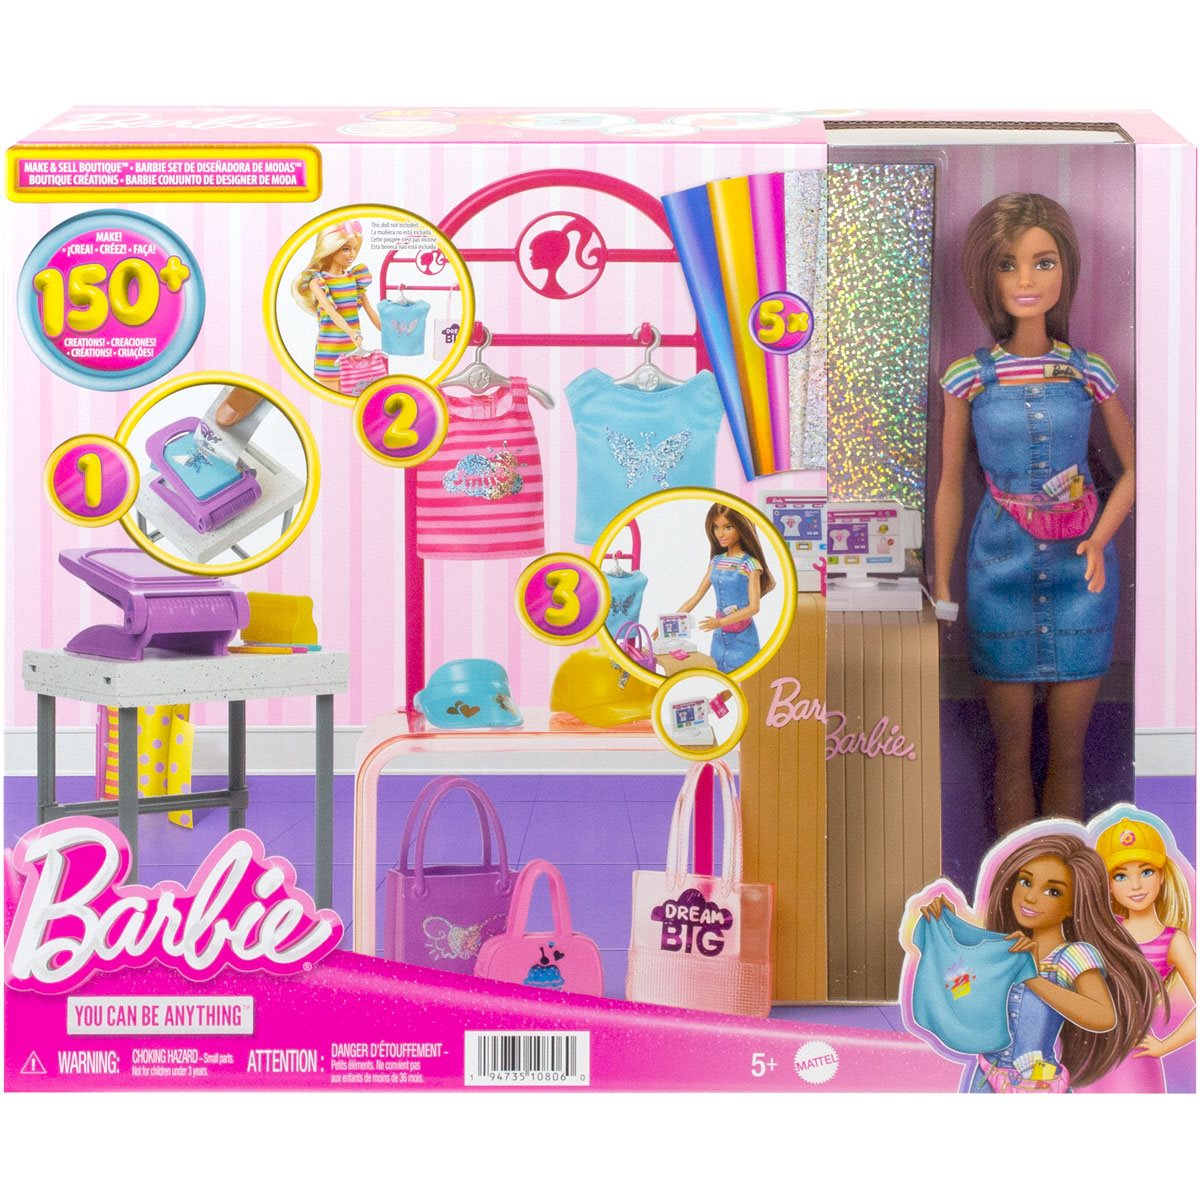 Barbie prices in country comparison: This is how much Mattel sells its  Barbie dolls for the film in the different countries